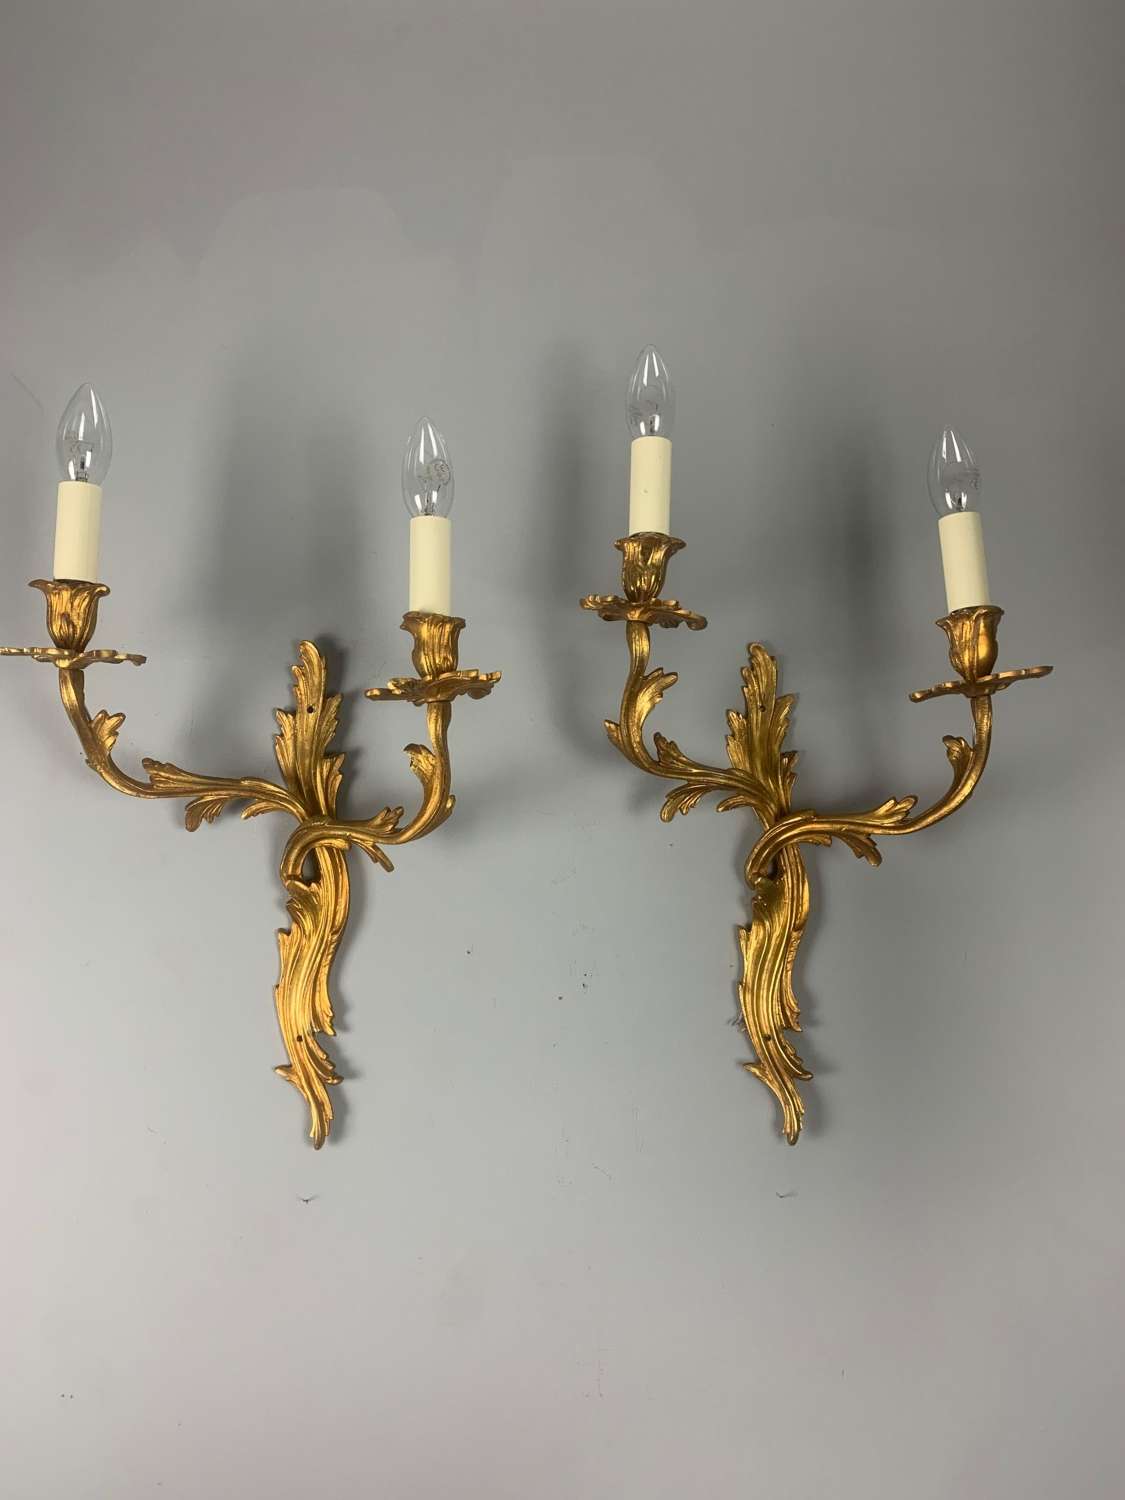 Large Pair Of French Rococo Gilt Bronze Antique Wall Lights, Rewired